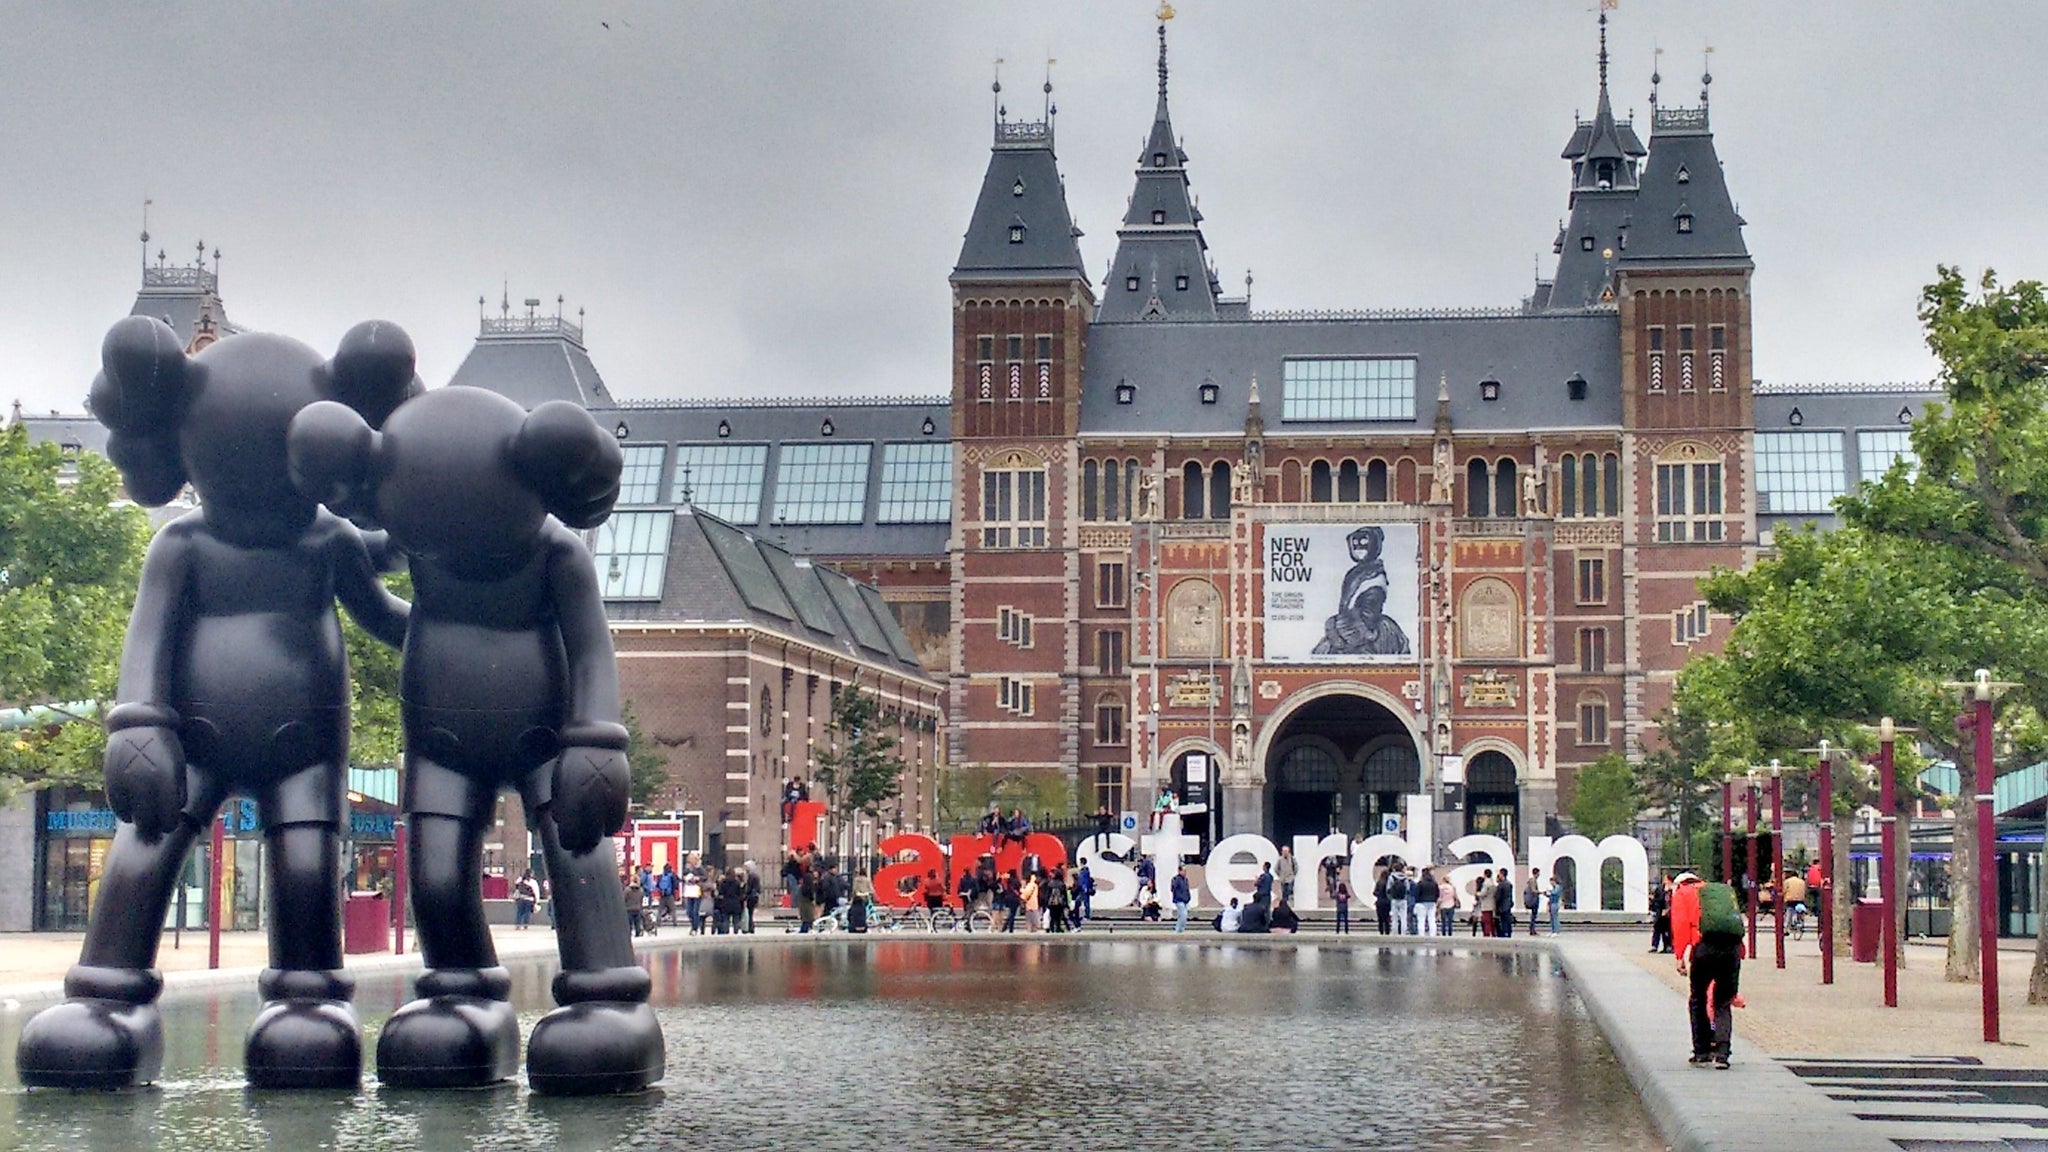 Amsterdam Rijks Museum with statues and tourists